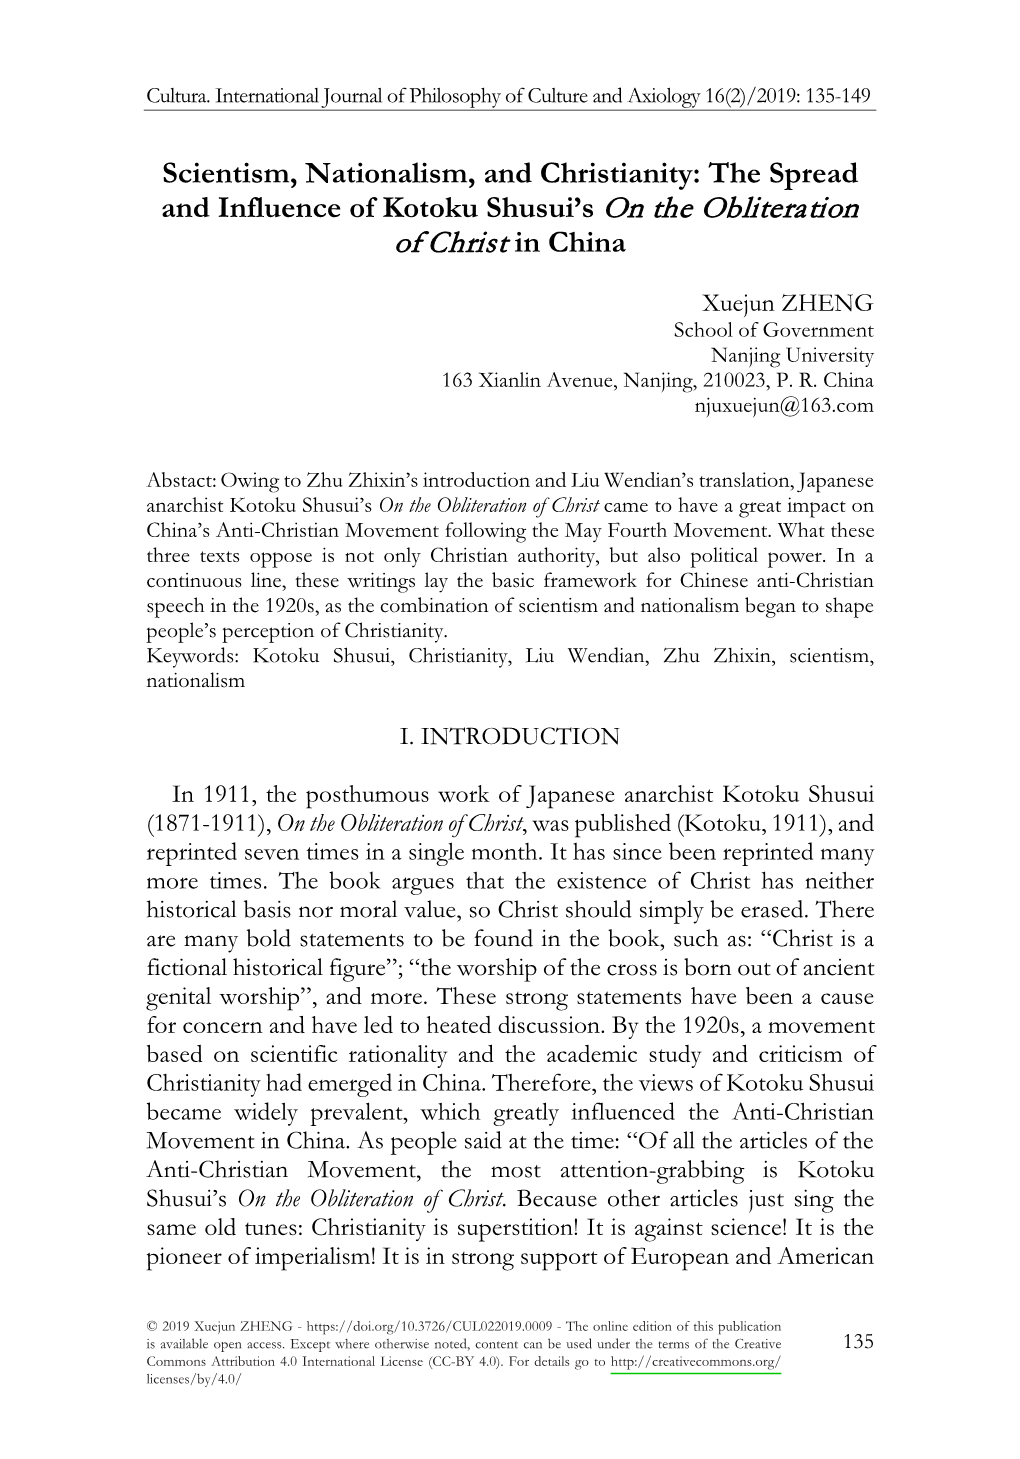 Scientism, Nationalism, and Christianity: the Spread and Influence of Kotoku Shusui’S on the Obliteration of Christ in China